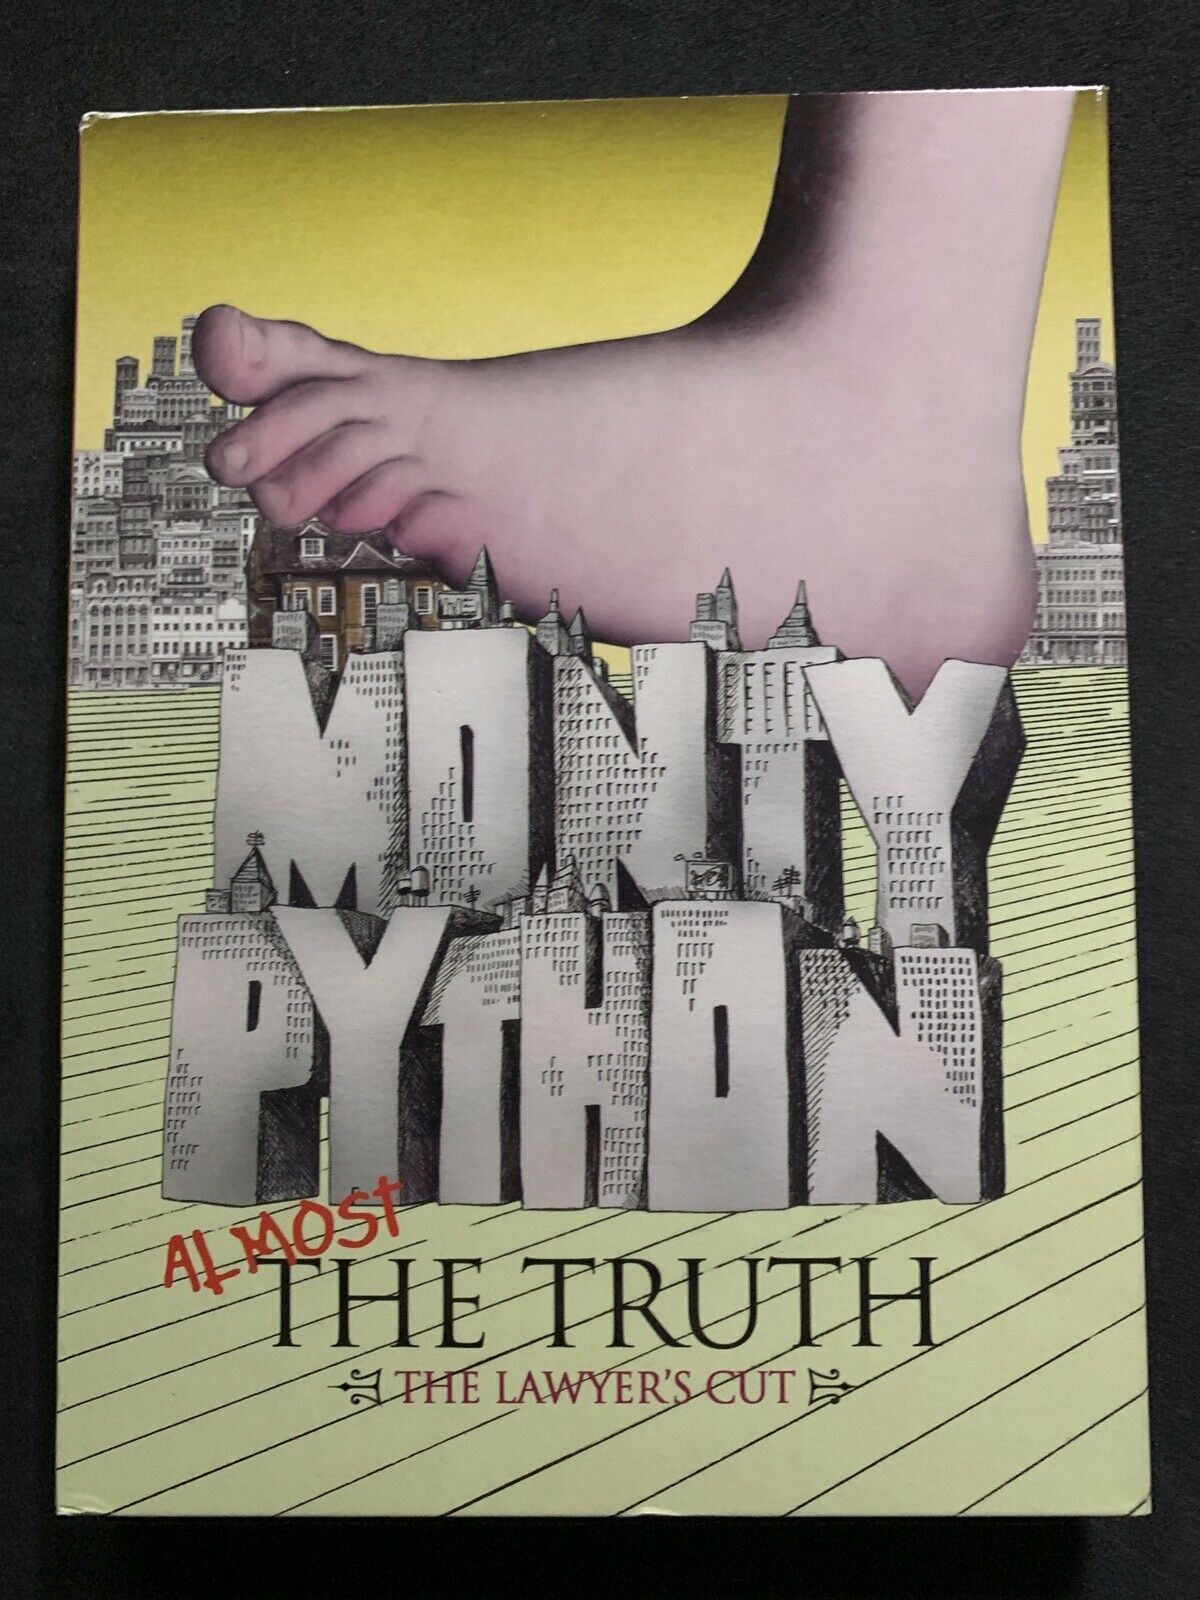 Monty Python: Almost the Truth - The Lawyer's Cut - DVD All Regions